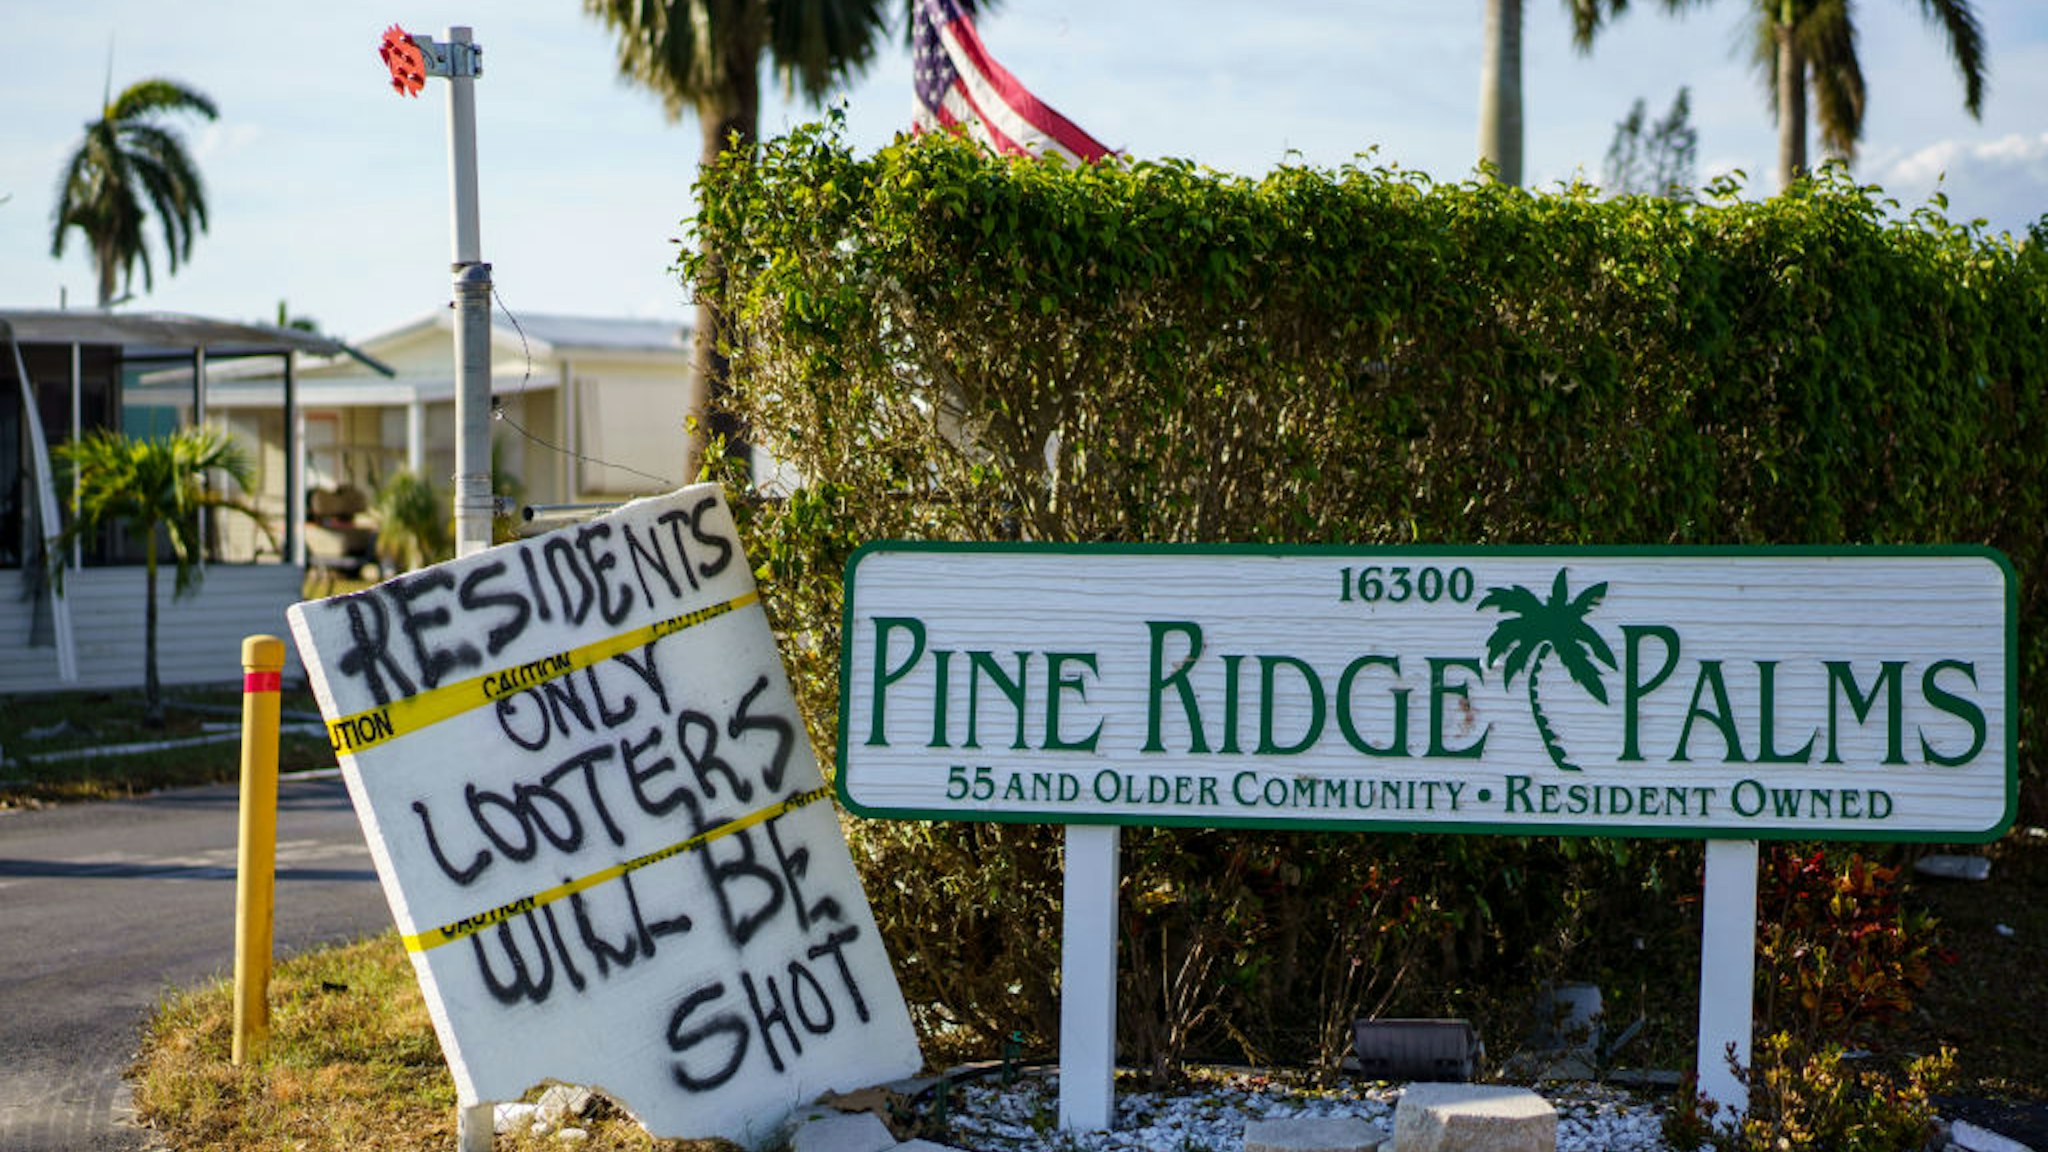 FORT MYERS BEACH FL - OCTOBER 3: A sign warning against looting after Hurricane Ian in the Pine Ridge Palms community of Fort Myers Beach, Fla. (Photo by Thomas Simonetti for The Washington Post via Getty Images)